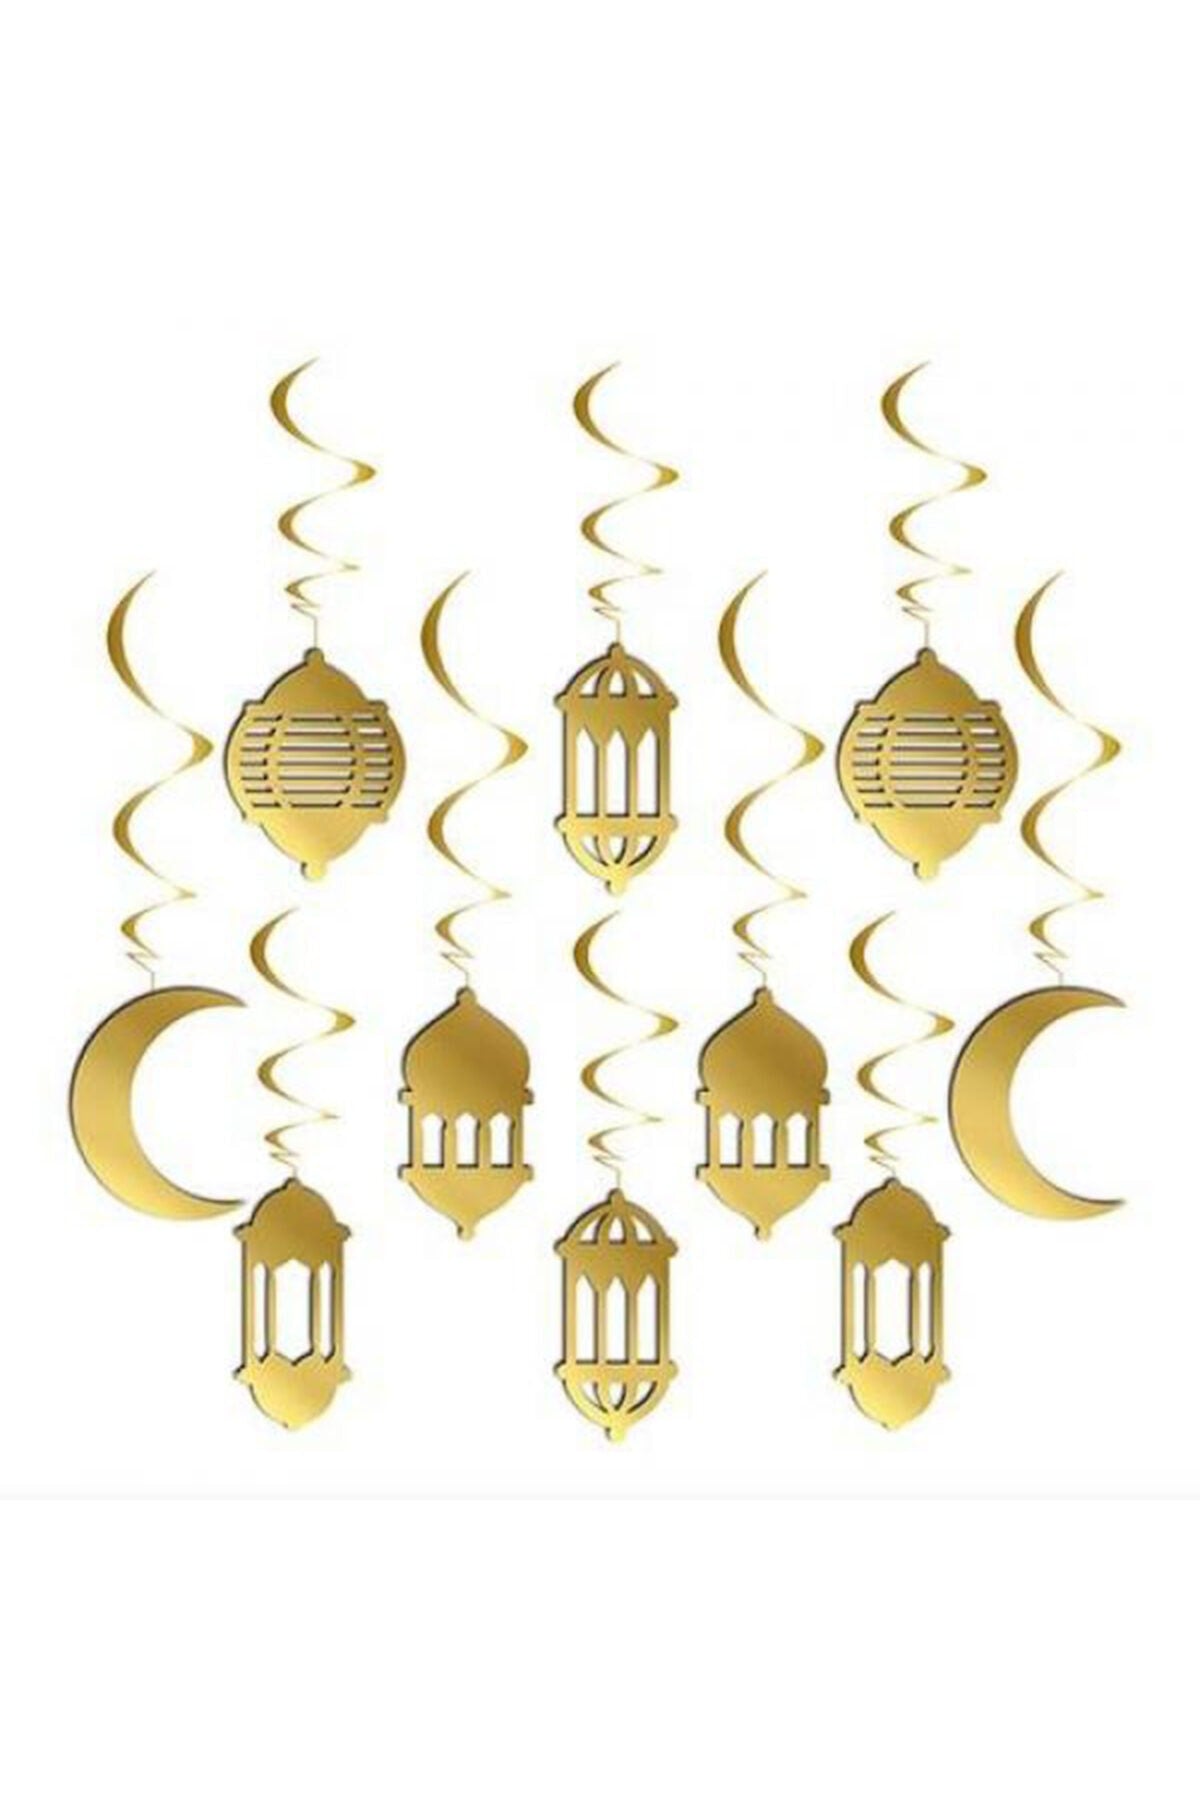 Huzur Party Store 10 Lu Gold 3d Ceiling Ornament Welcome Ya City Eid al-Fitr Sultan of 11 Months Suspended Religious Islamic Ornament HZRRAMAZANFOLYOBALONA